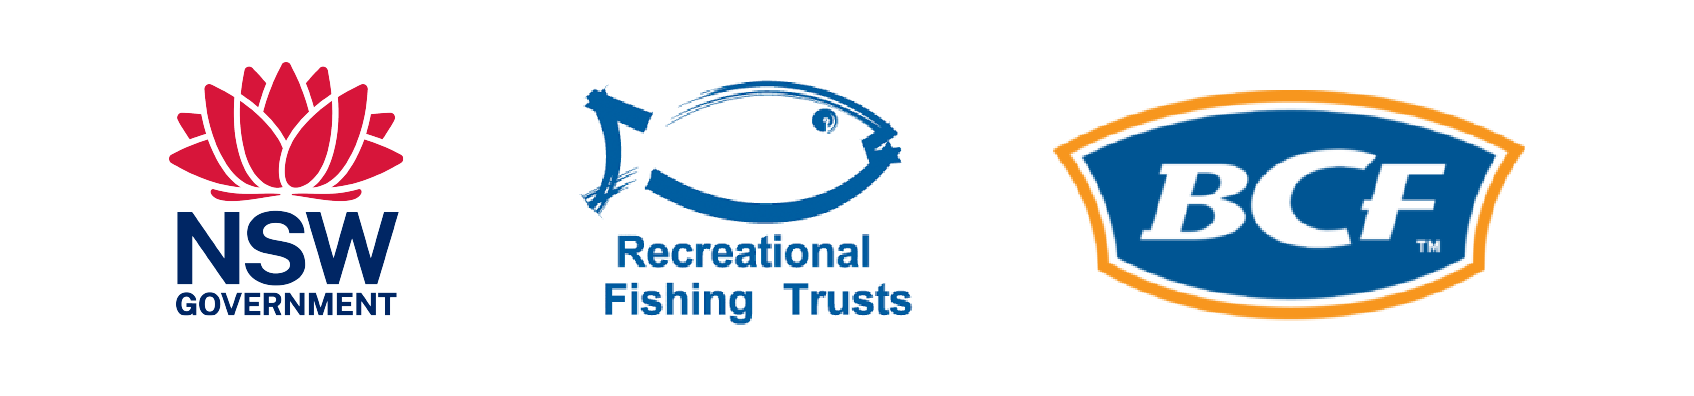 NSW Government, Recreational Fishing Trusts and BCF logos